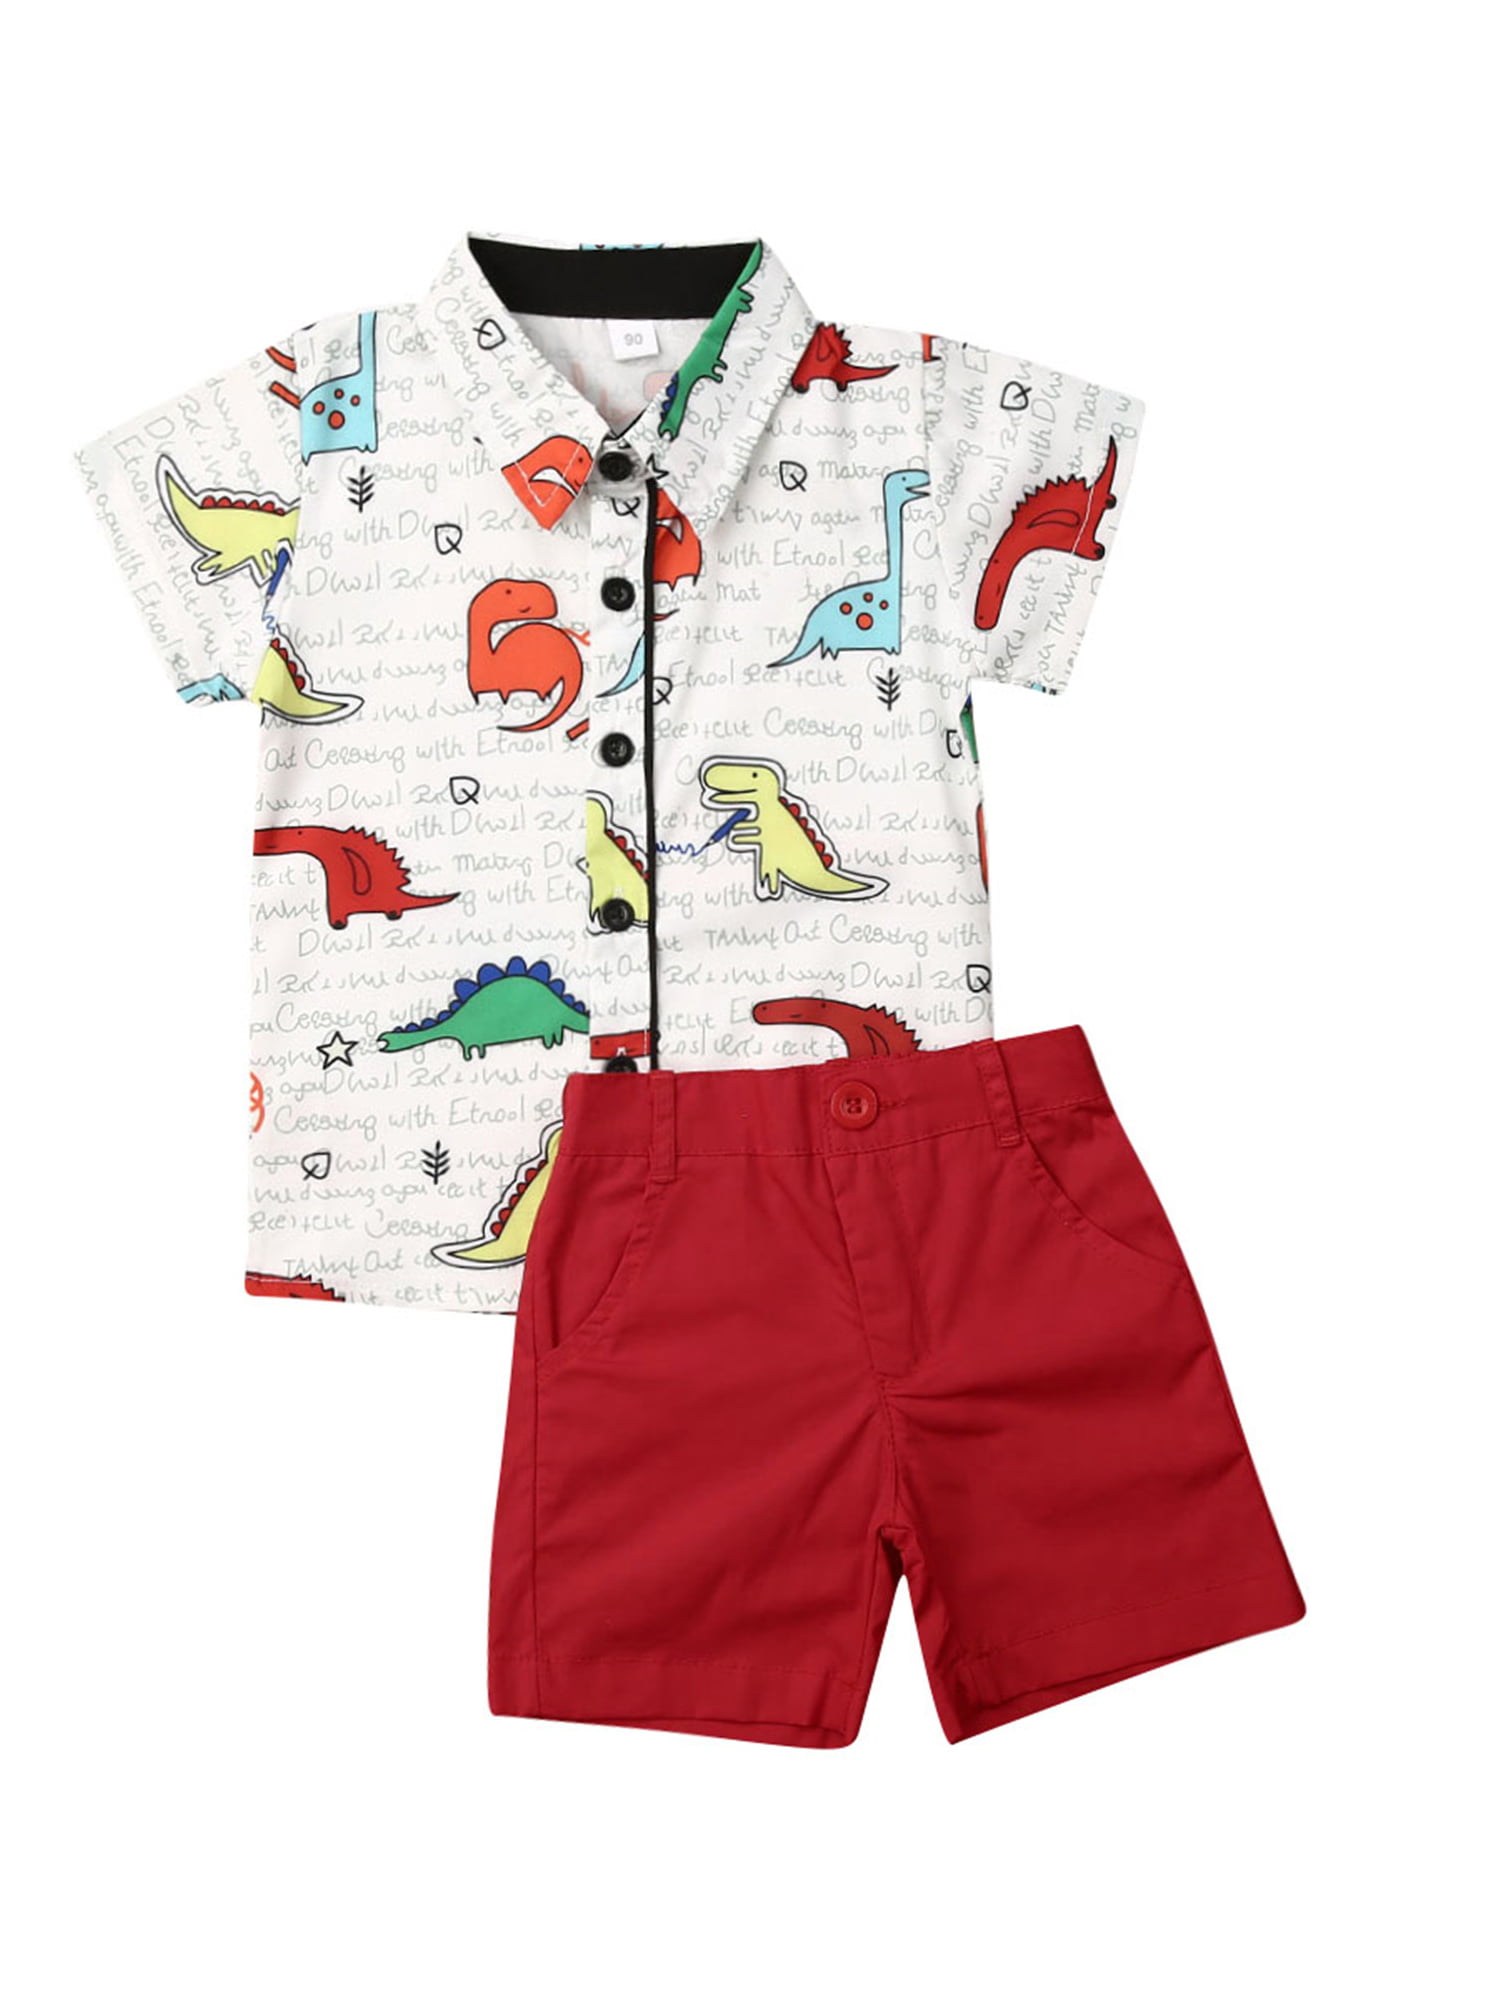 Toddler Baby Boy Short Sleeve Button Down Shirt & Shorts Set 2T 3T 4T 5T 6T Outfits Summer Clothes 